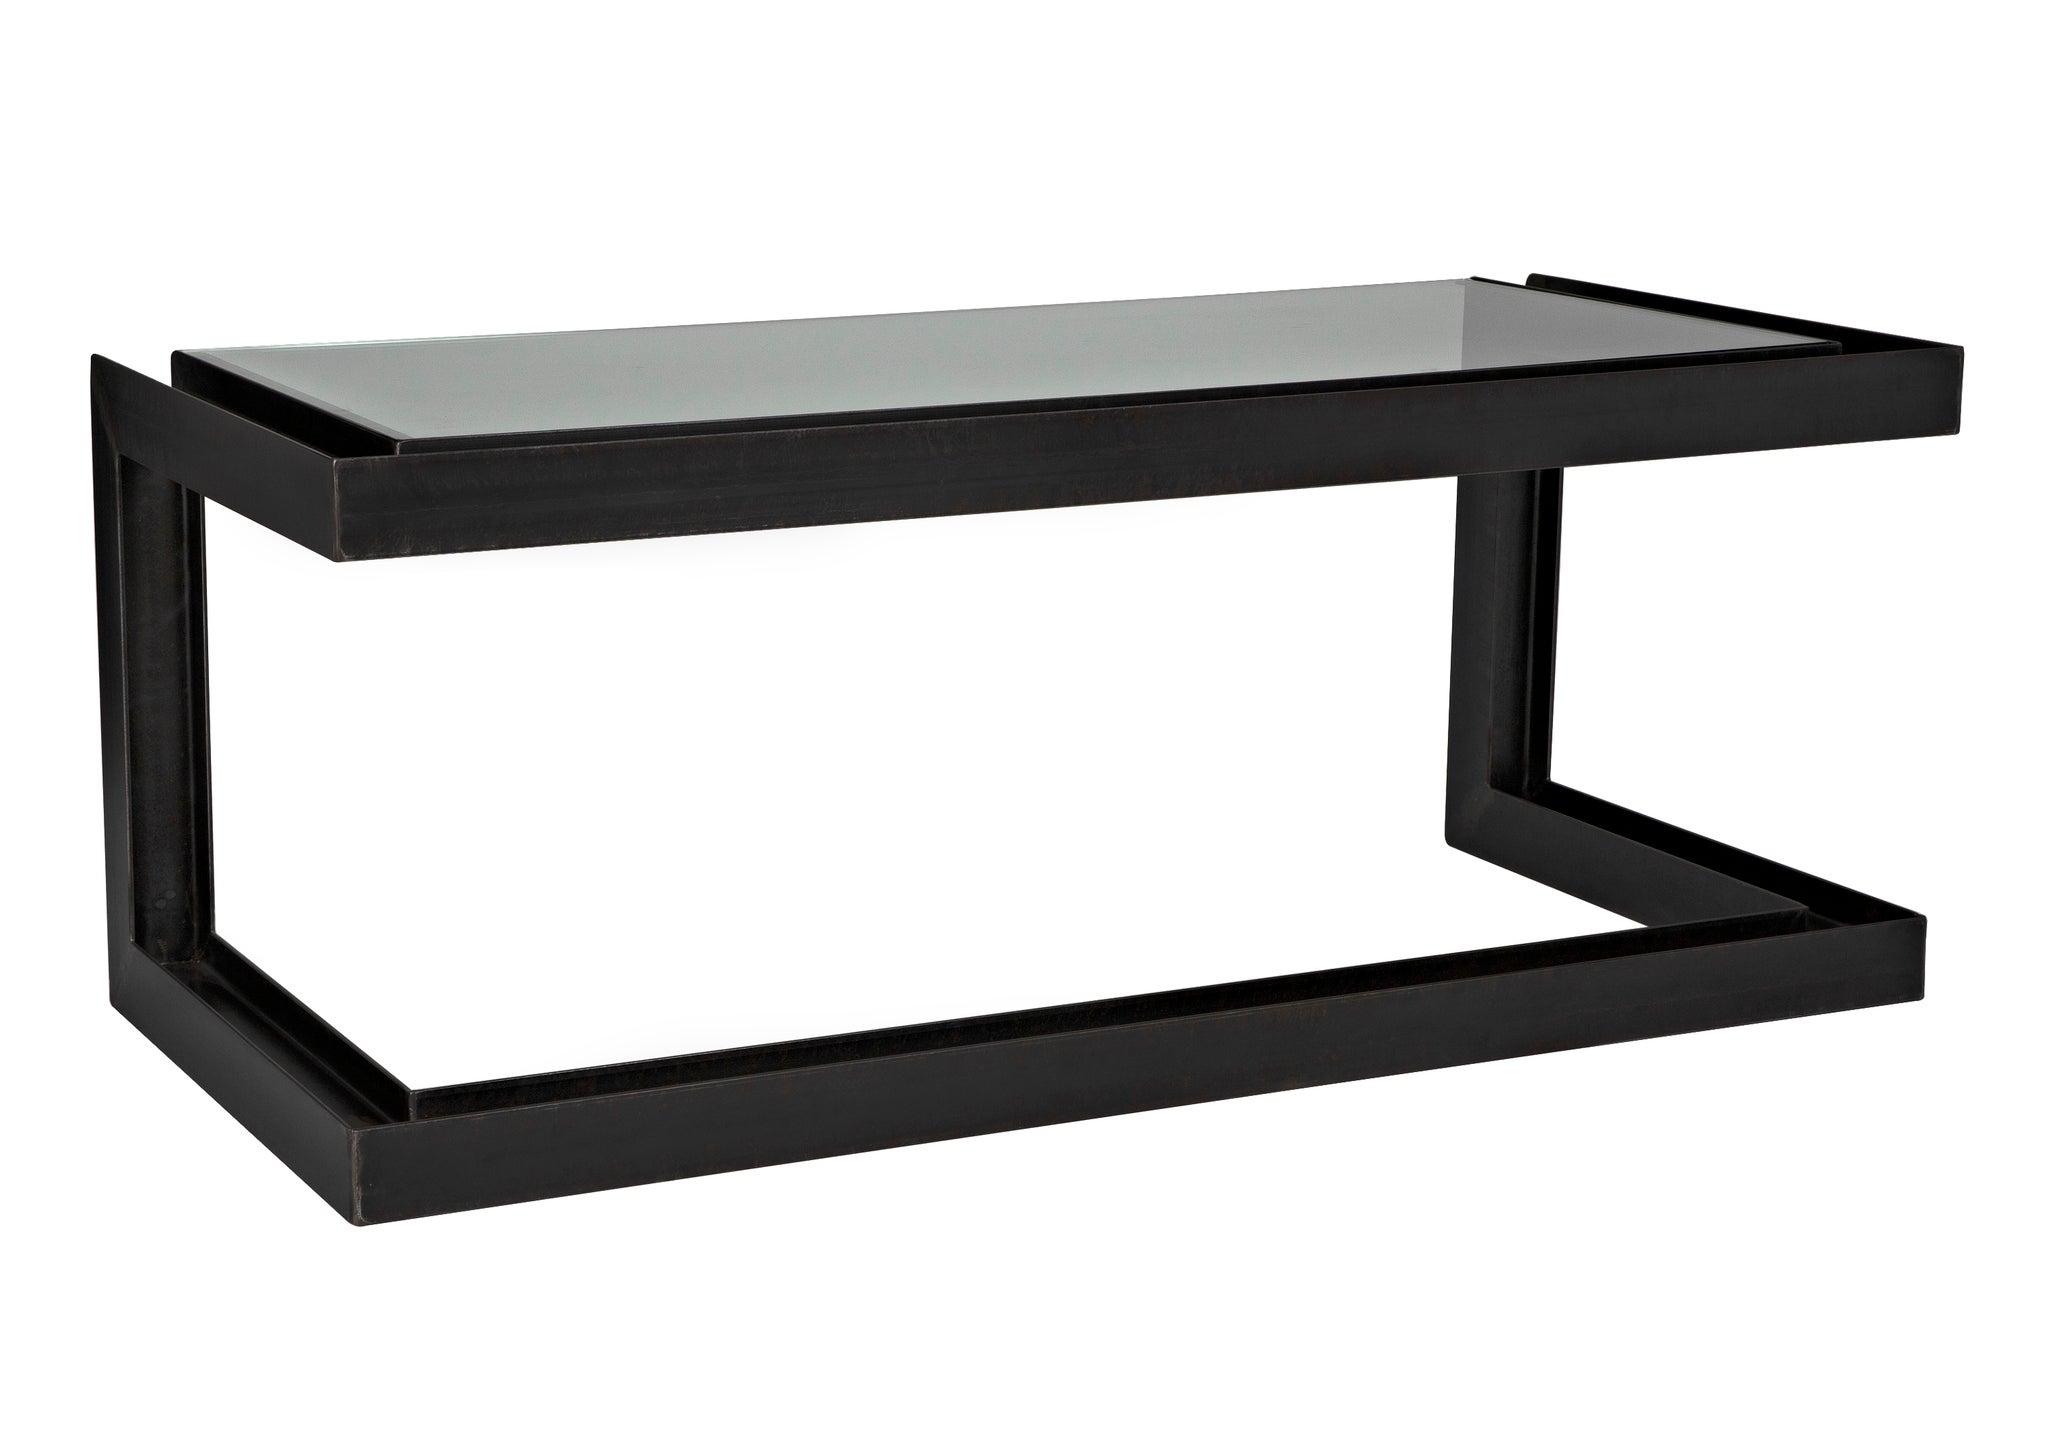 Structure Metal Desk - search results | Noir Trading, Inc.